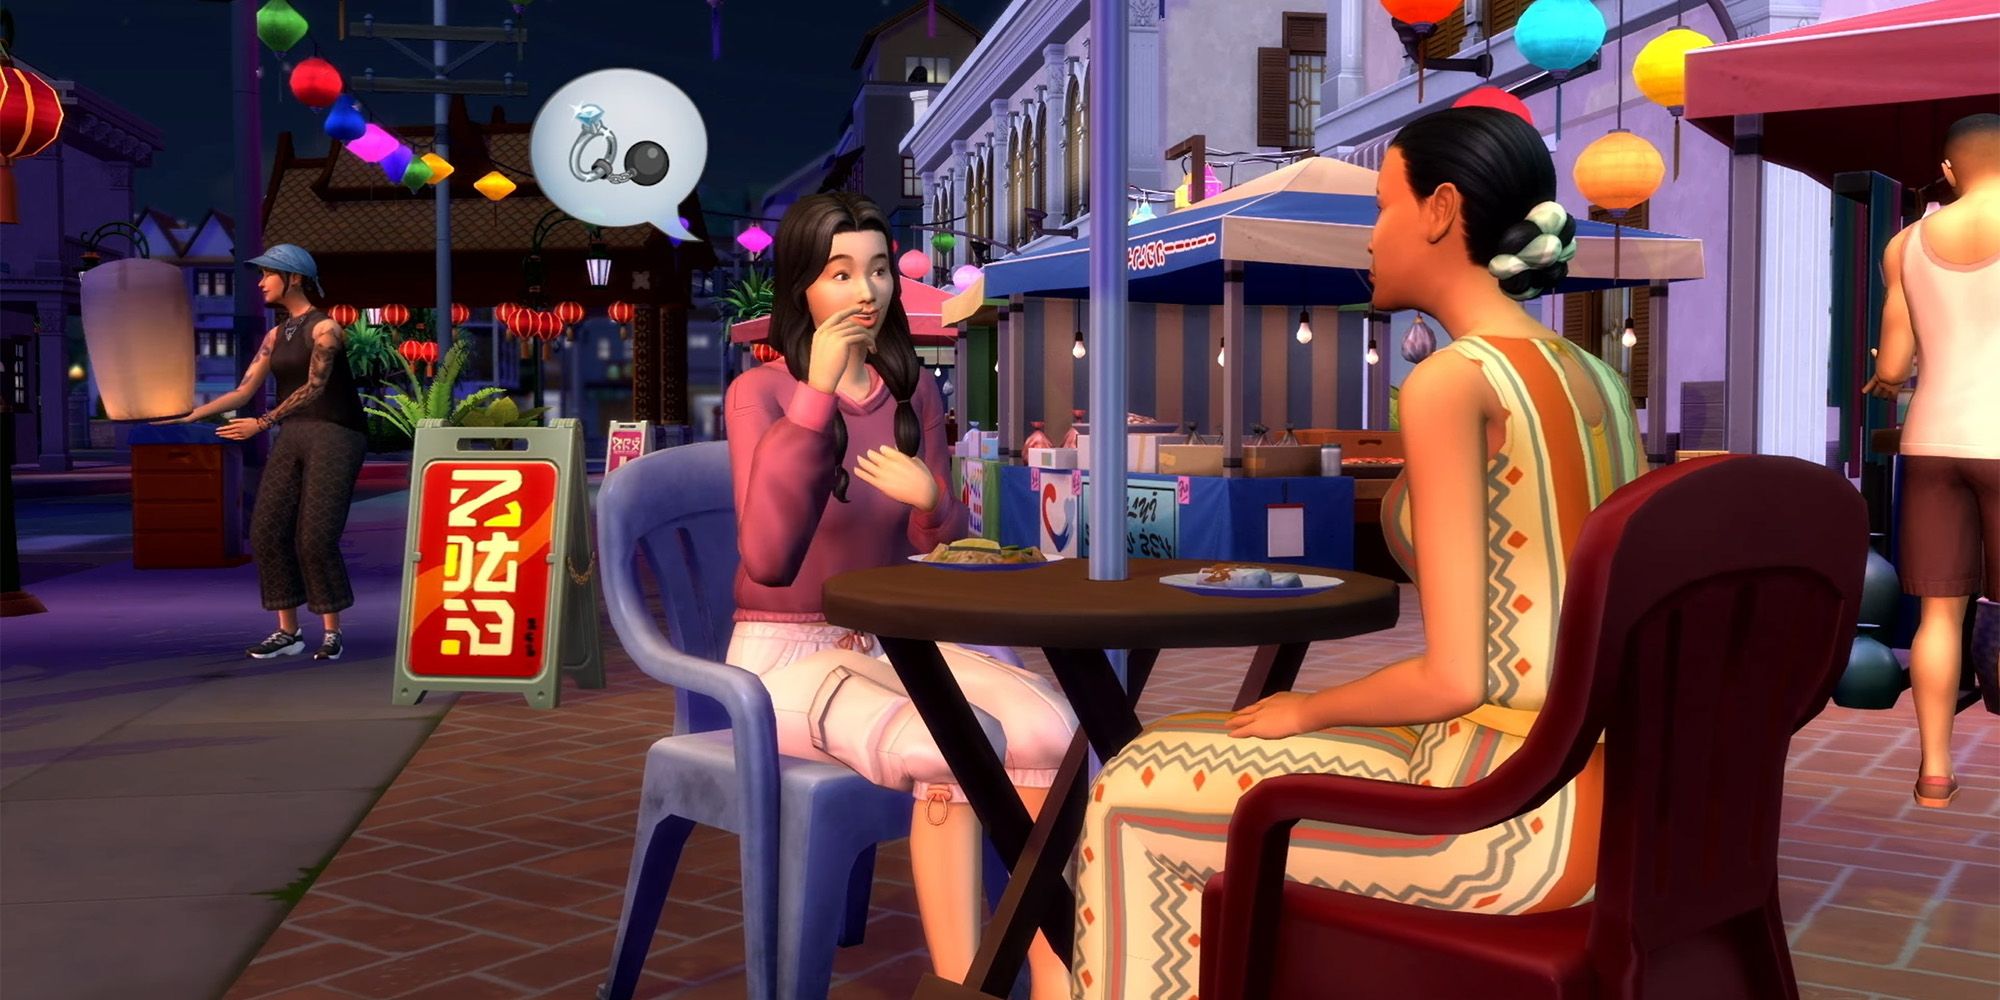 Two Sims talking over dinner in The Sims 4